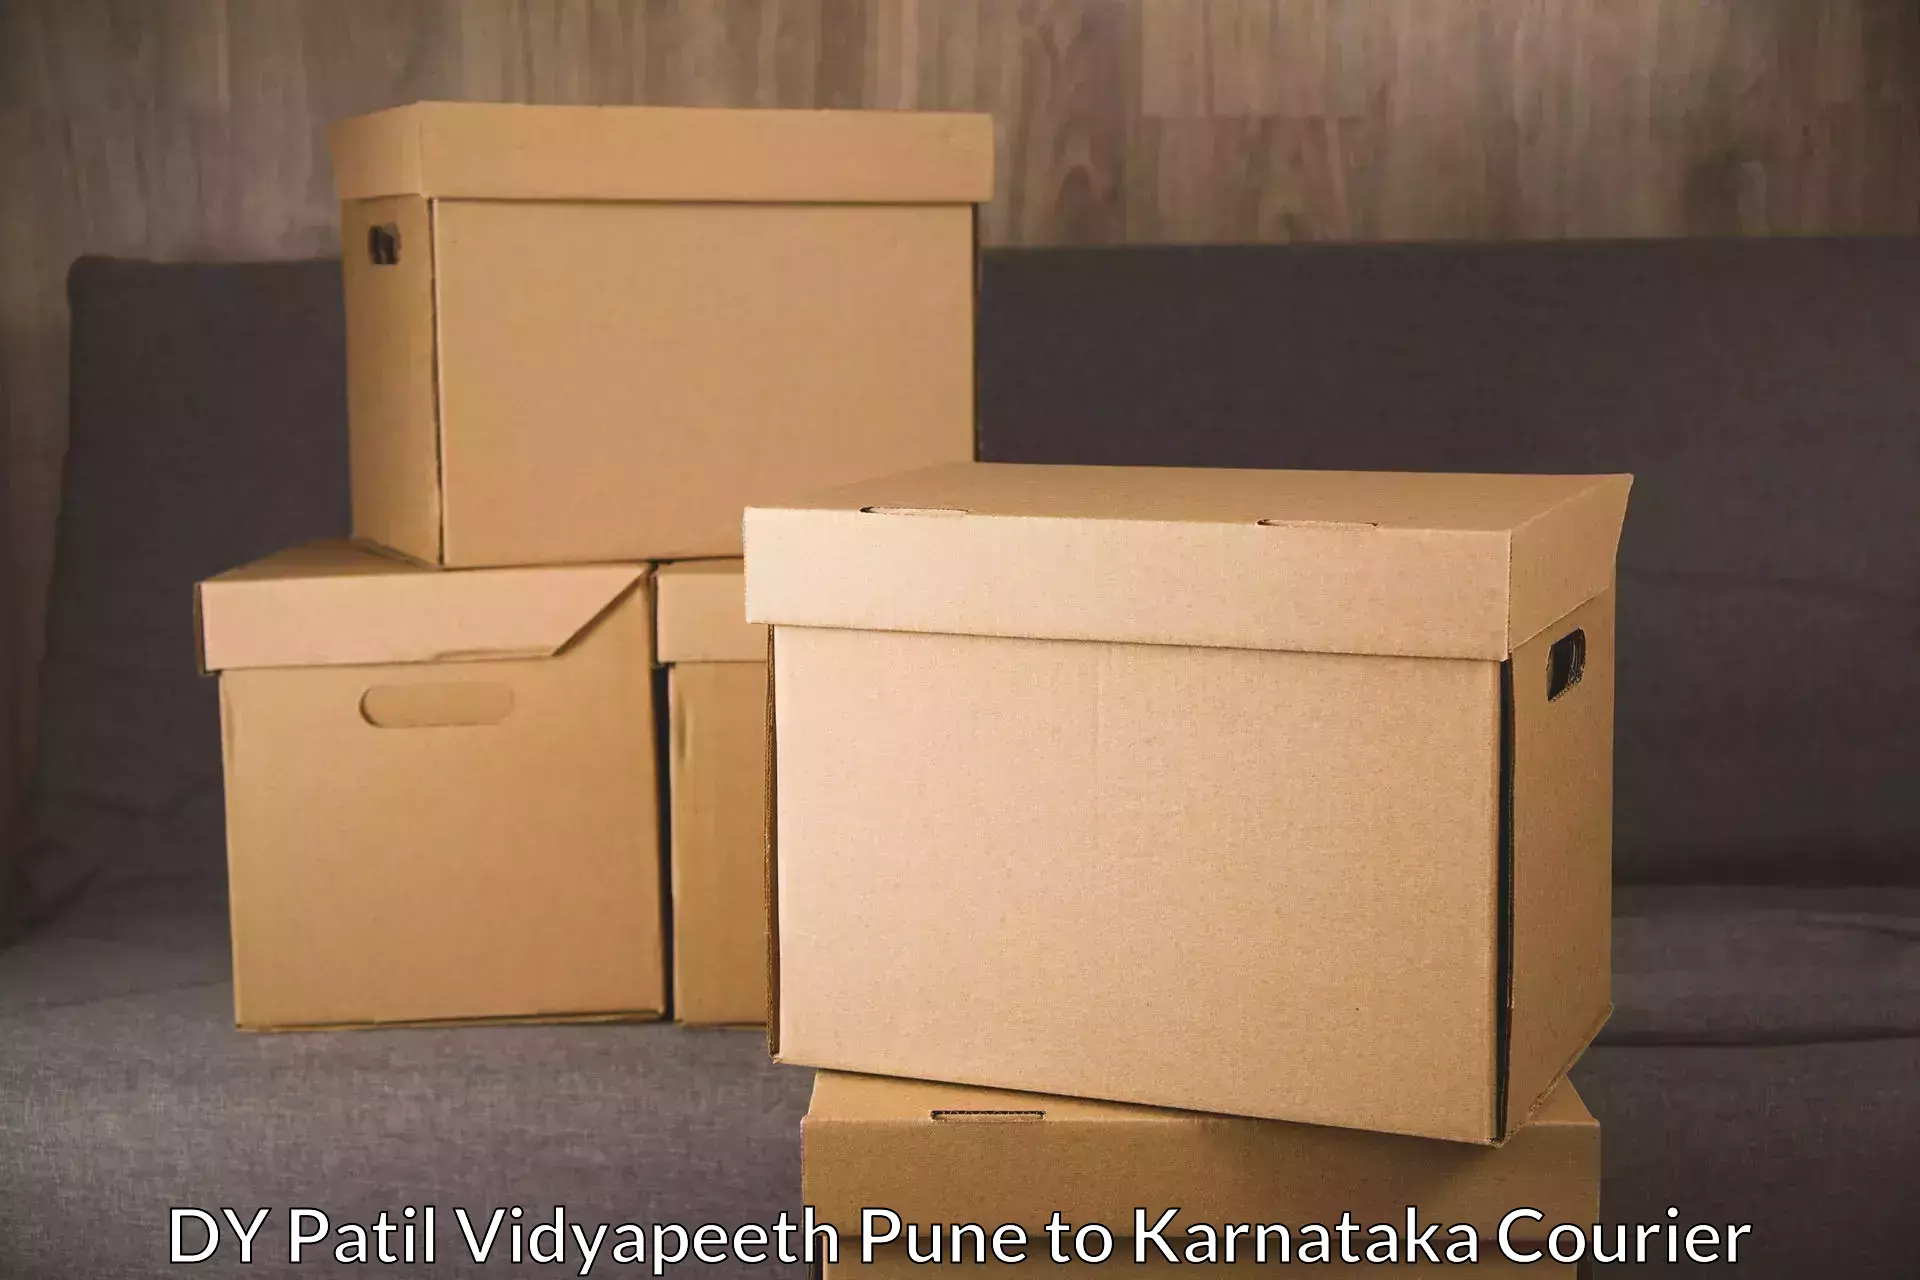 Lightweight parcel options in DY Patil Vidyapeeth Pune to Anavatti